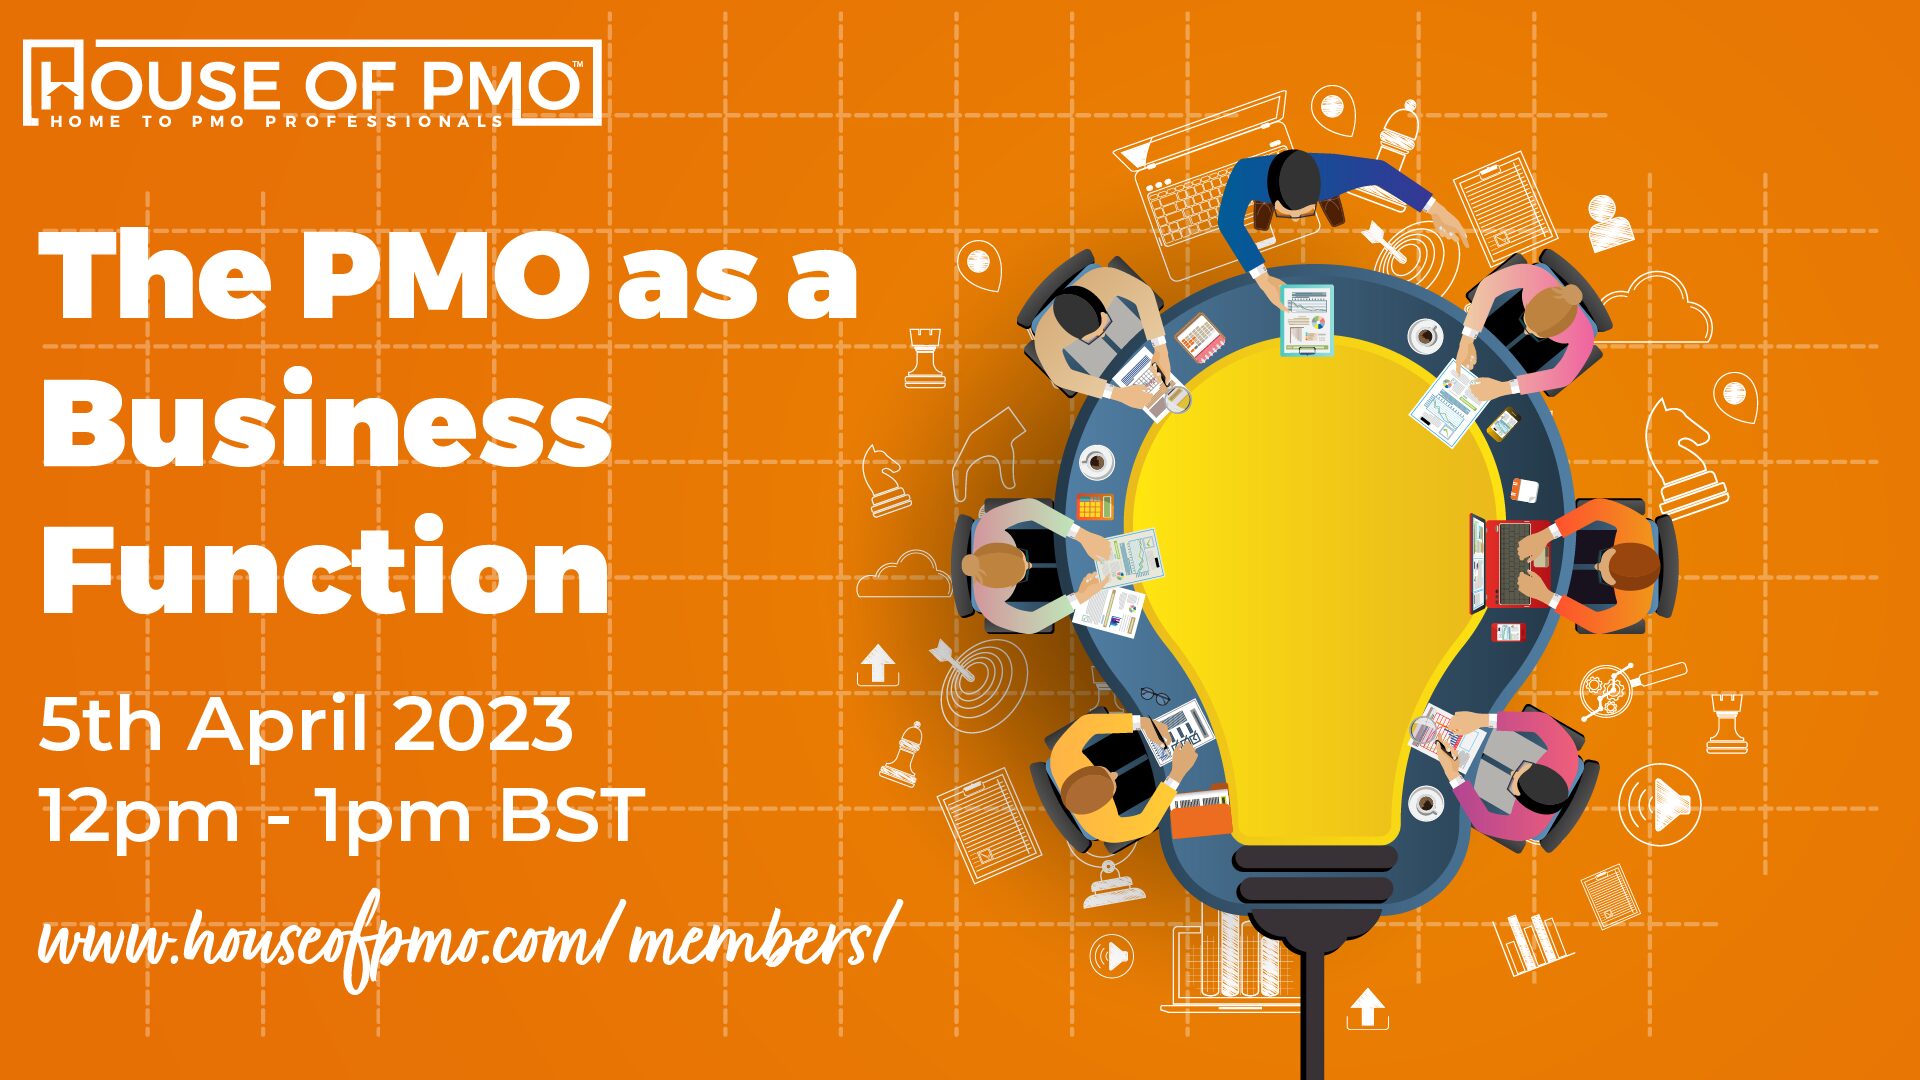 Image for the event the PMO as a business function- happening on the 5th of april. The image shows cartoon workers sat at a light bulb shaped table discussing ideas.